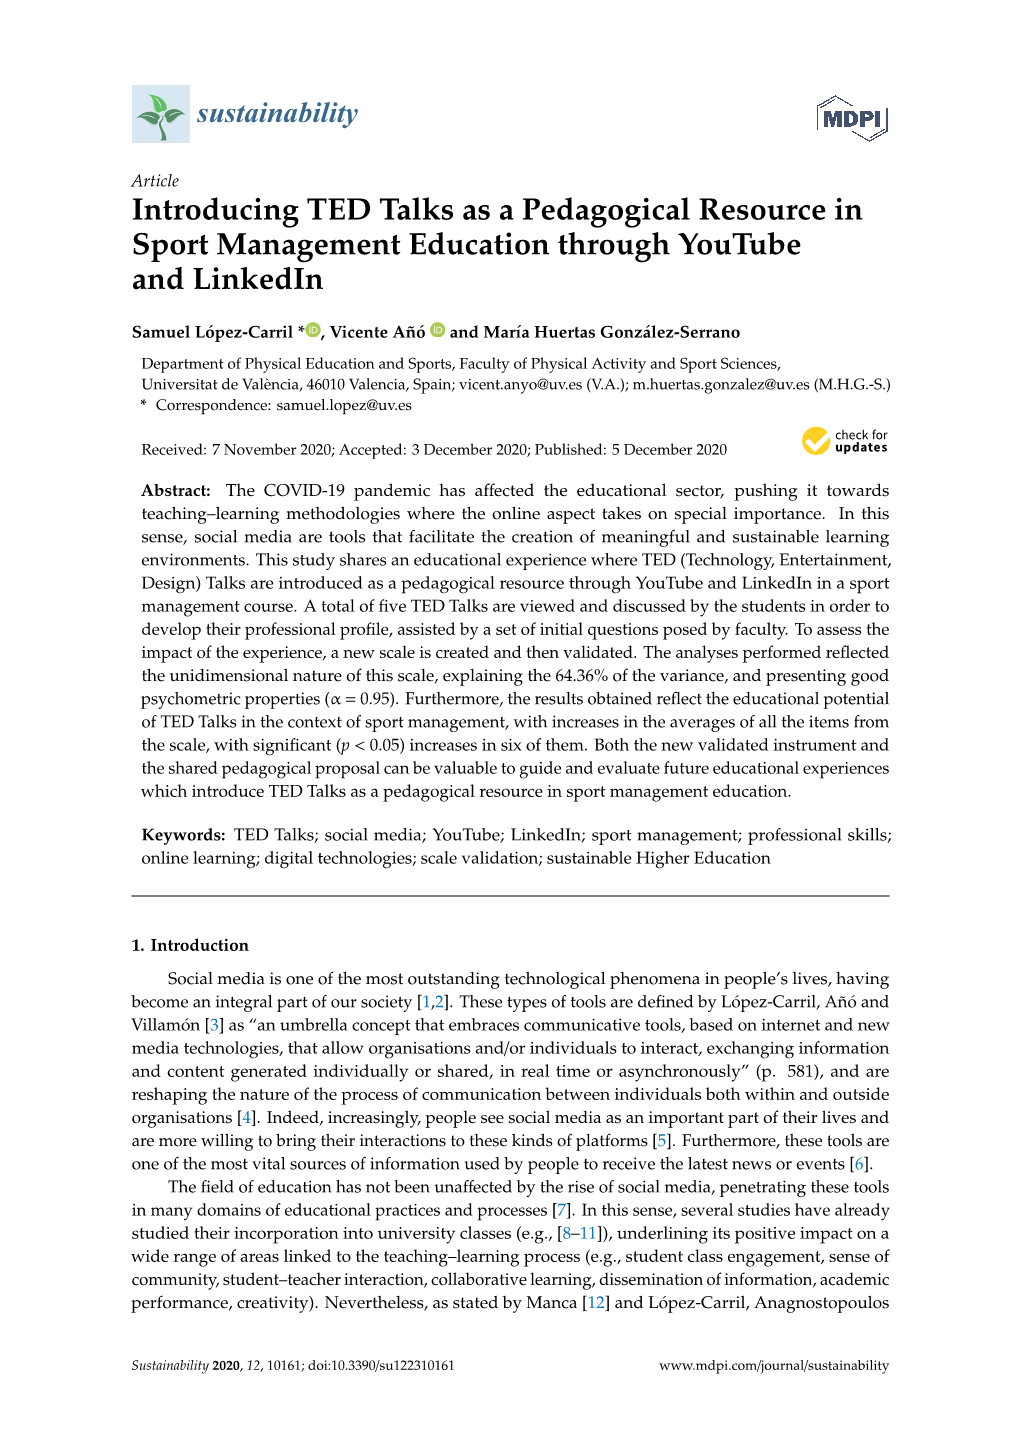 Introducing TED Talks As a Pedagogical Resource in Sport Management Education Through Youtube and Linkedin